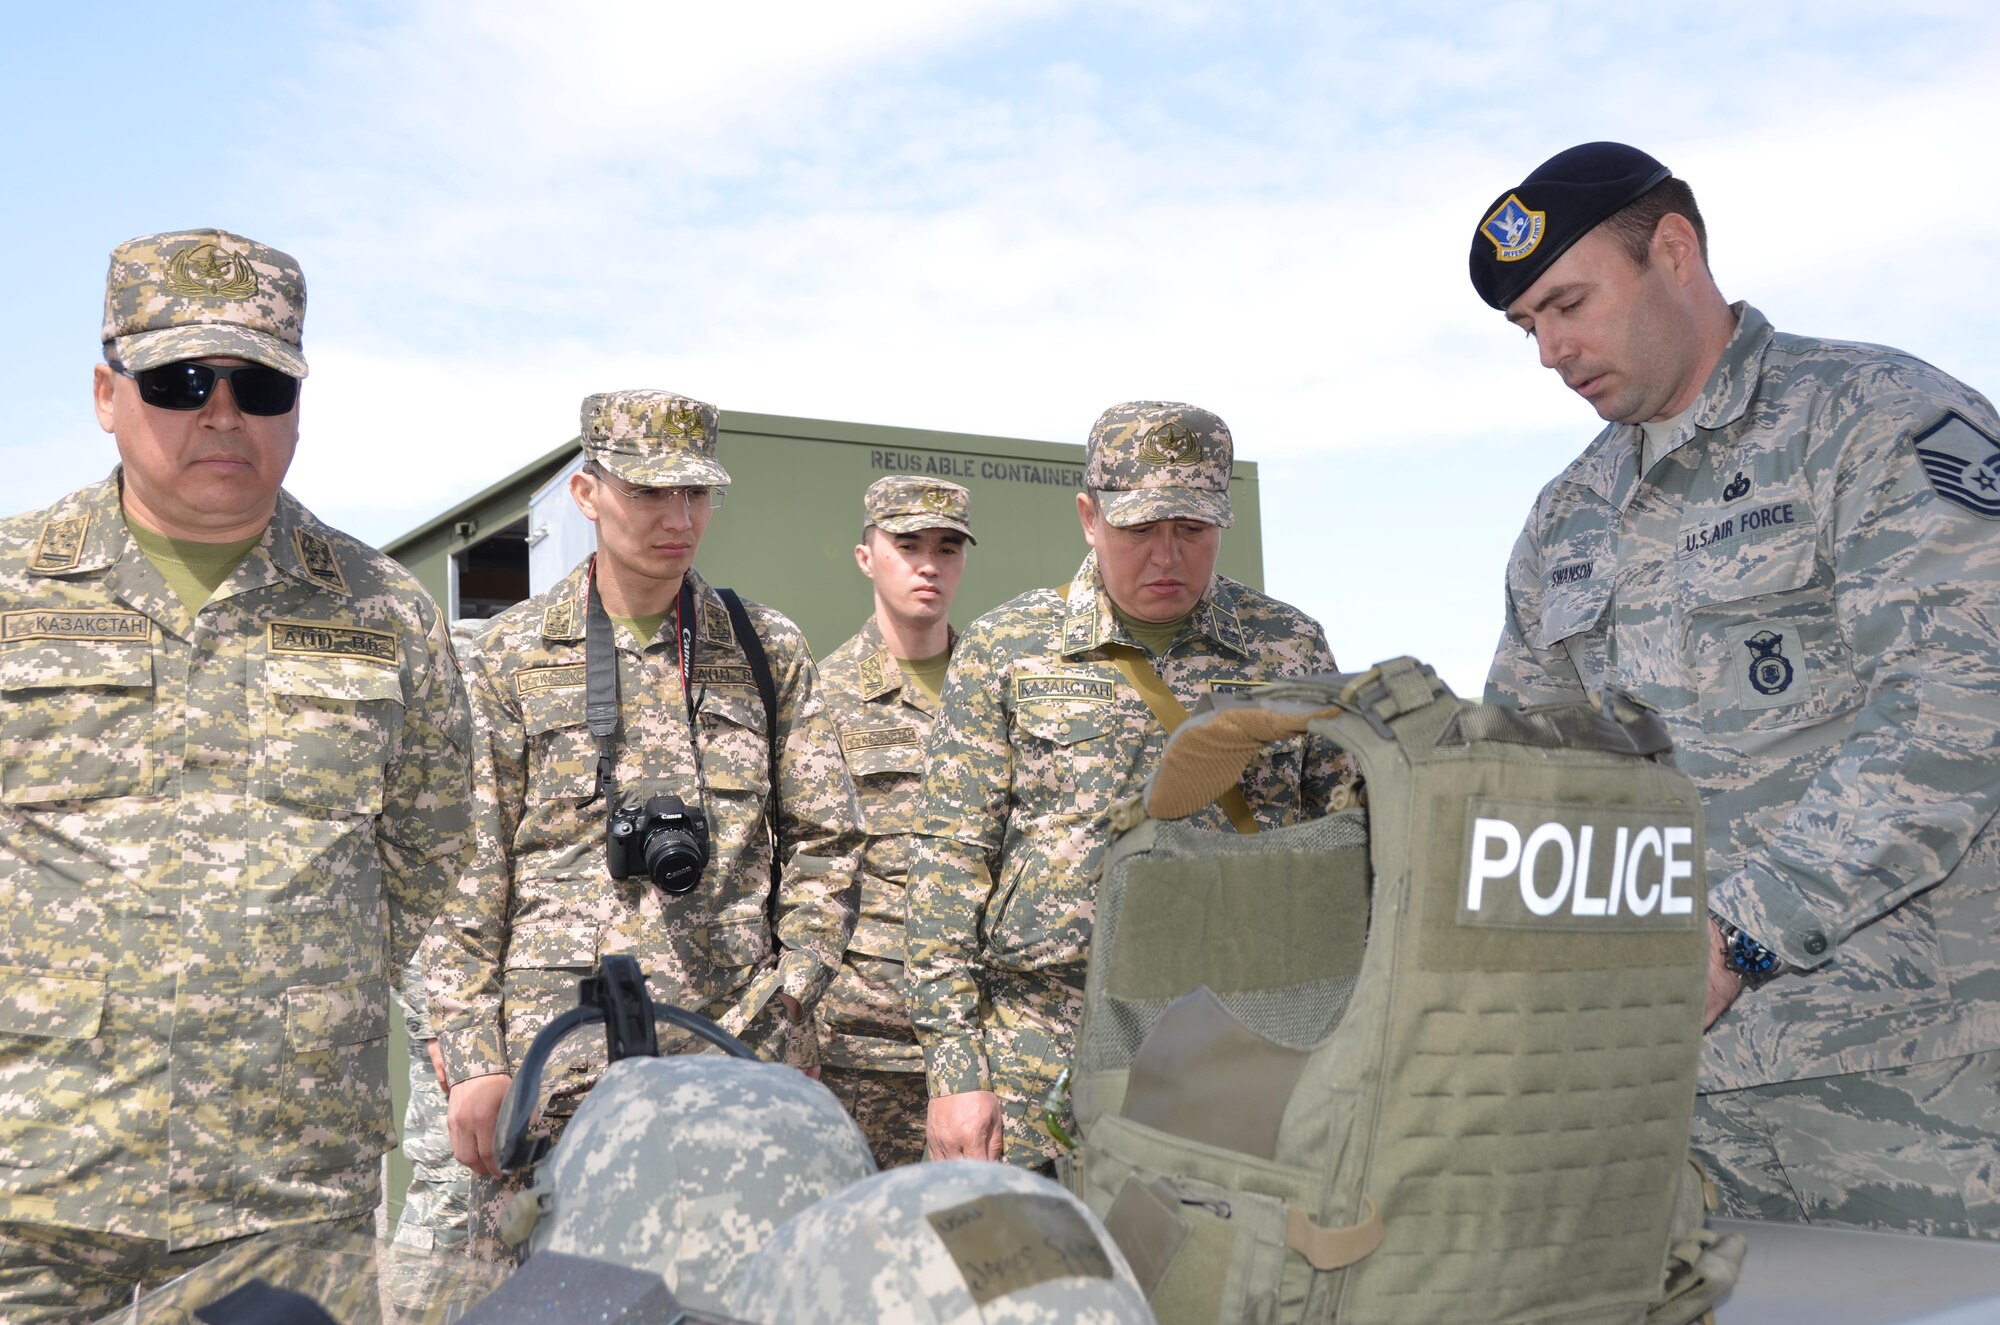 Air Force Master Sgt. James Swanson (right), security forces operations superintendent for the 161st Security Forces Squadron, shows a delegation of Kazakh military officers law enforcement gear during a tour of Goldwater Air National Guard Base. The Arizona Air National Guard hosted the officers, March 31, as part of the National Guard's State Partnership Program. (U.S. Air National Guard photo by 2nd Lt. Tinashe Machona).